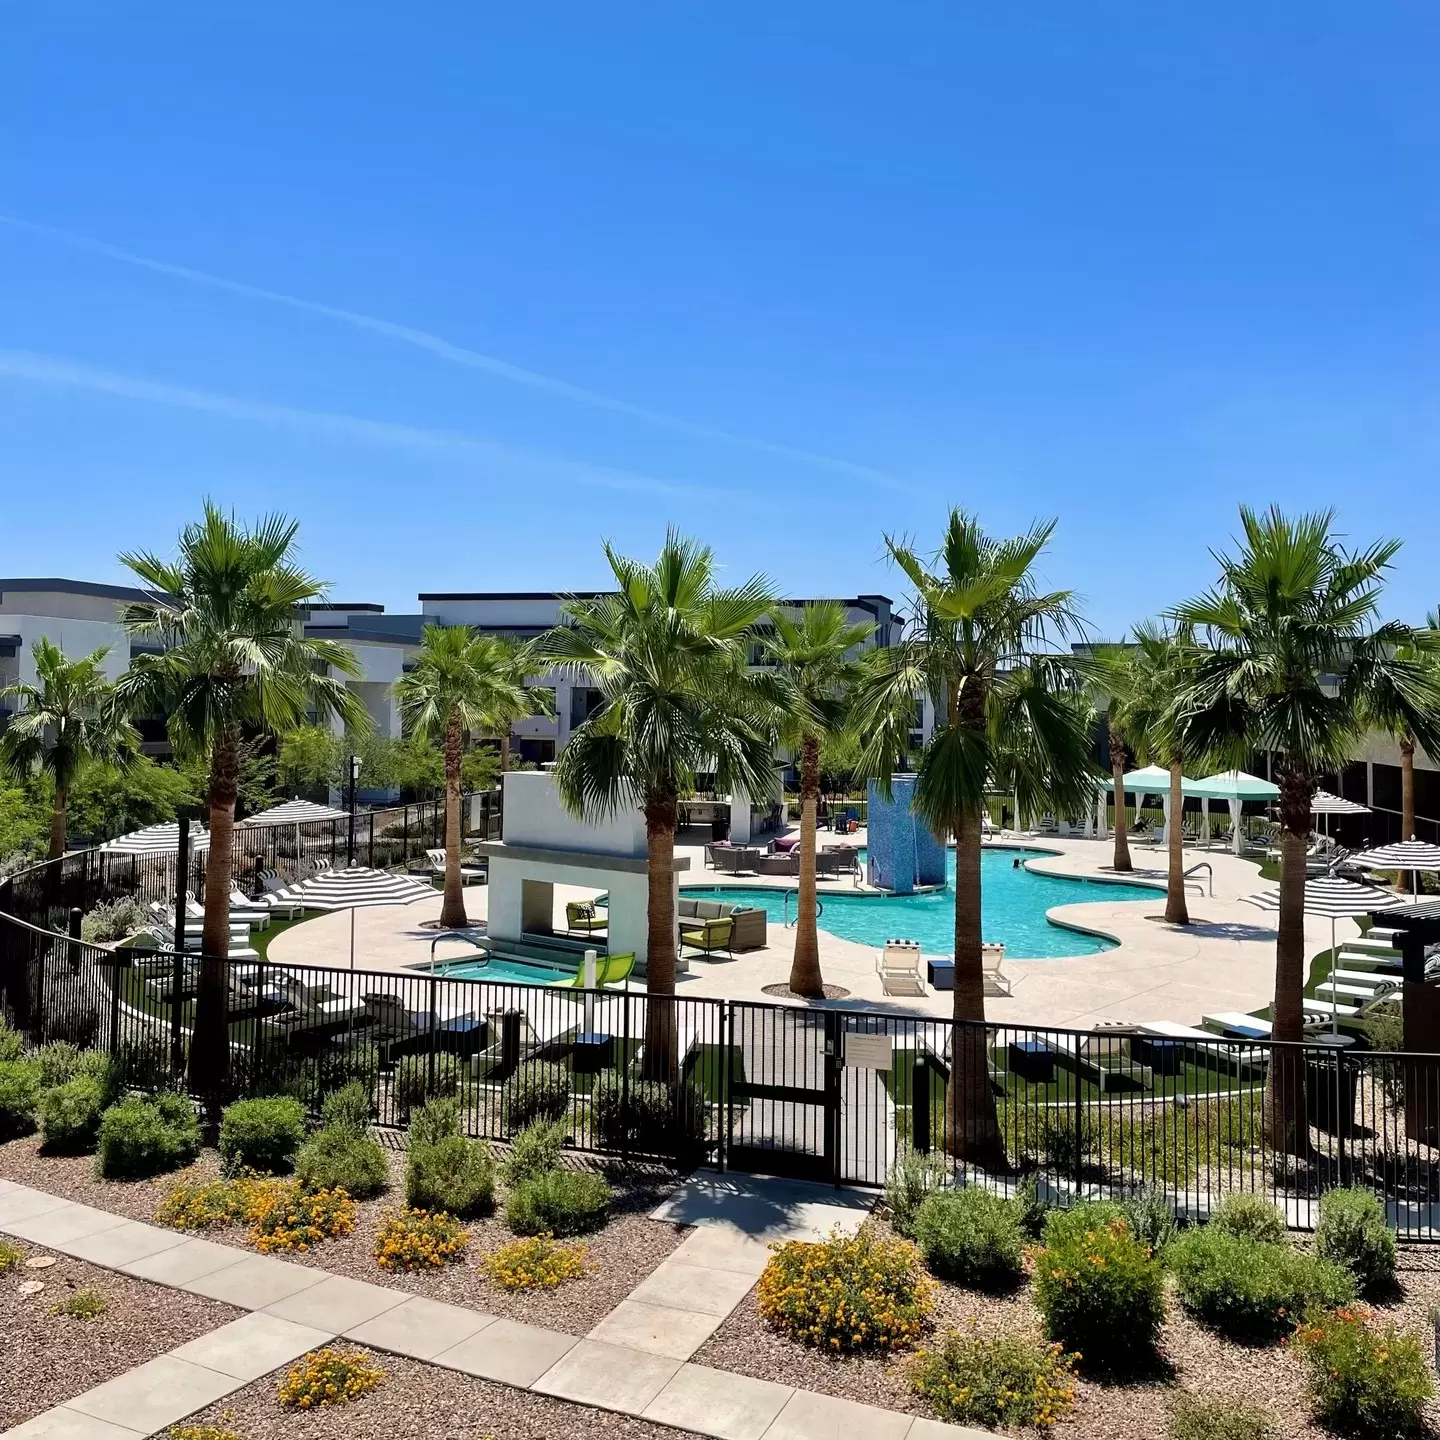 Check out this stunning patio view! 😍

This poolside 2 bedroom is available now! Refer a friend and receive a $400 rent credit! 💵

Call us for more details!! 
.
.
.
#LivLikeNoOther #LivPool #LuxuryLiving #LivCrossroads